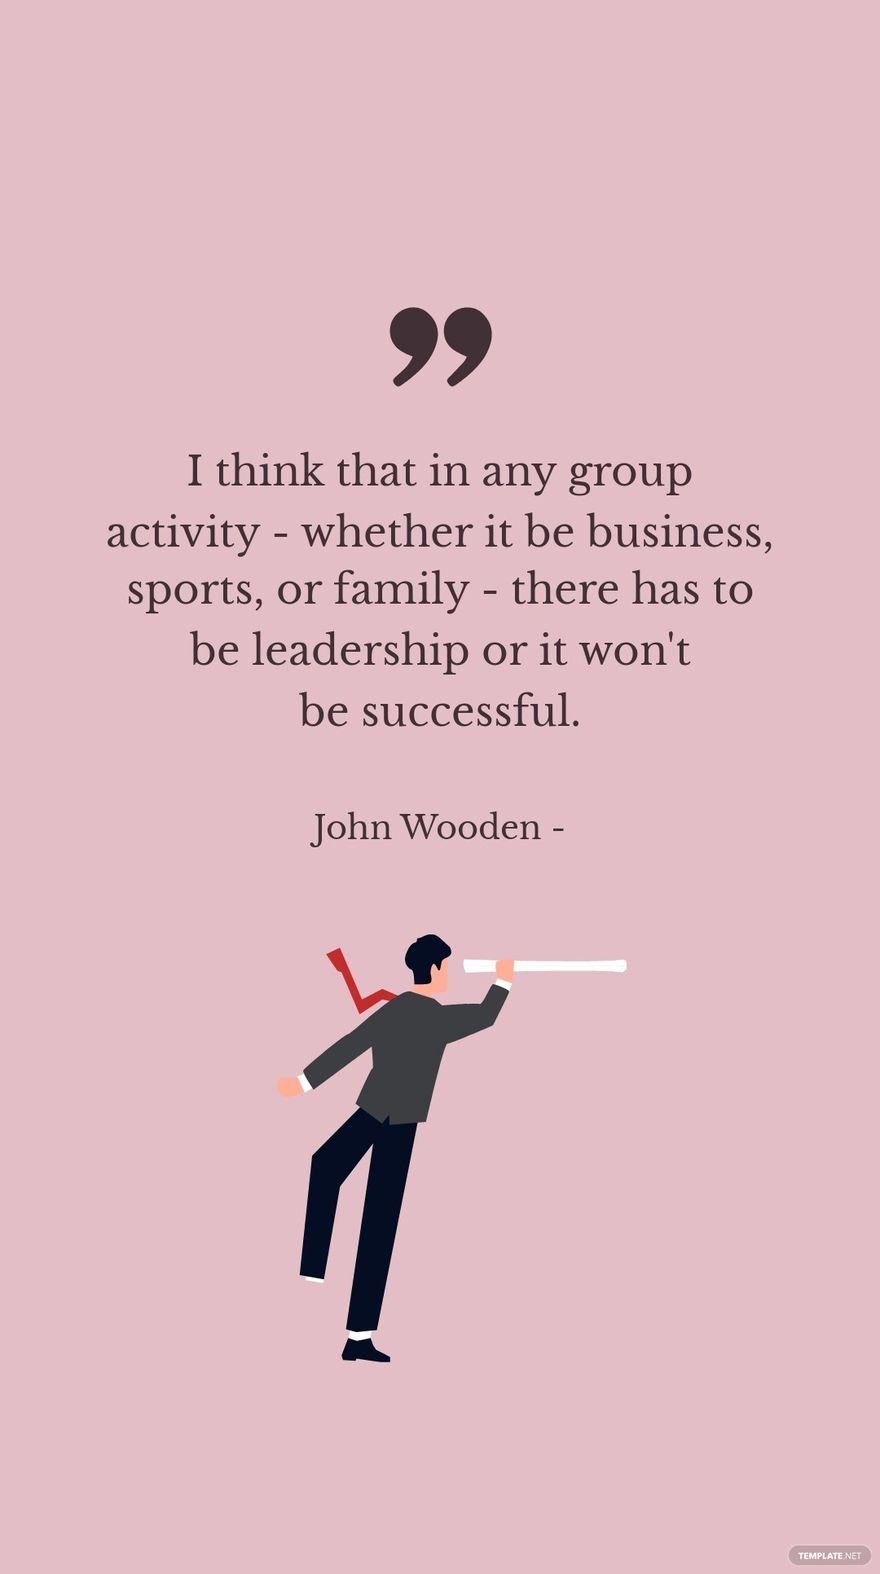 John Wooden - I think that in any group activity - whether it be business, sports, or family - there has to be leadership or it won't be successful.